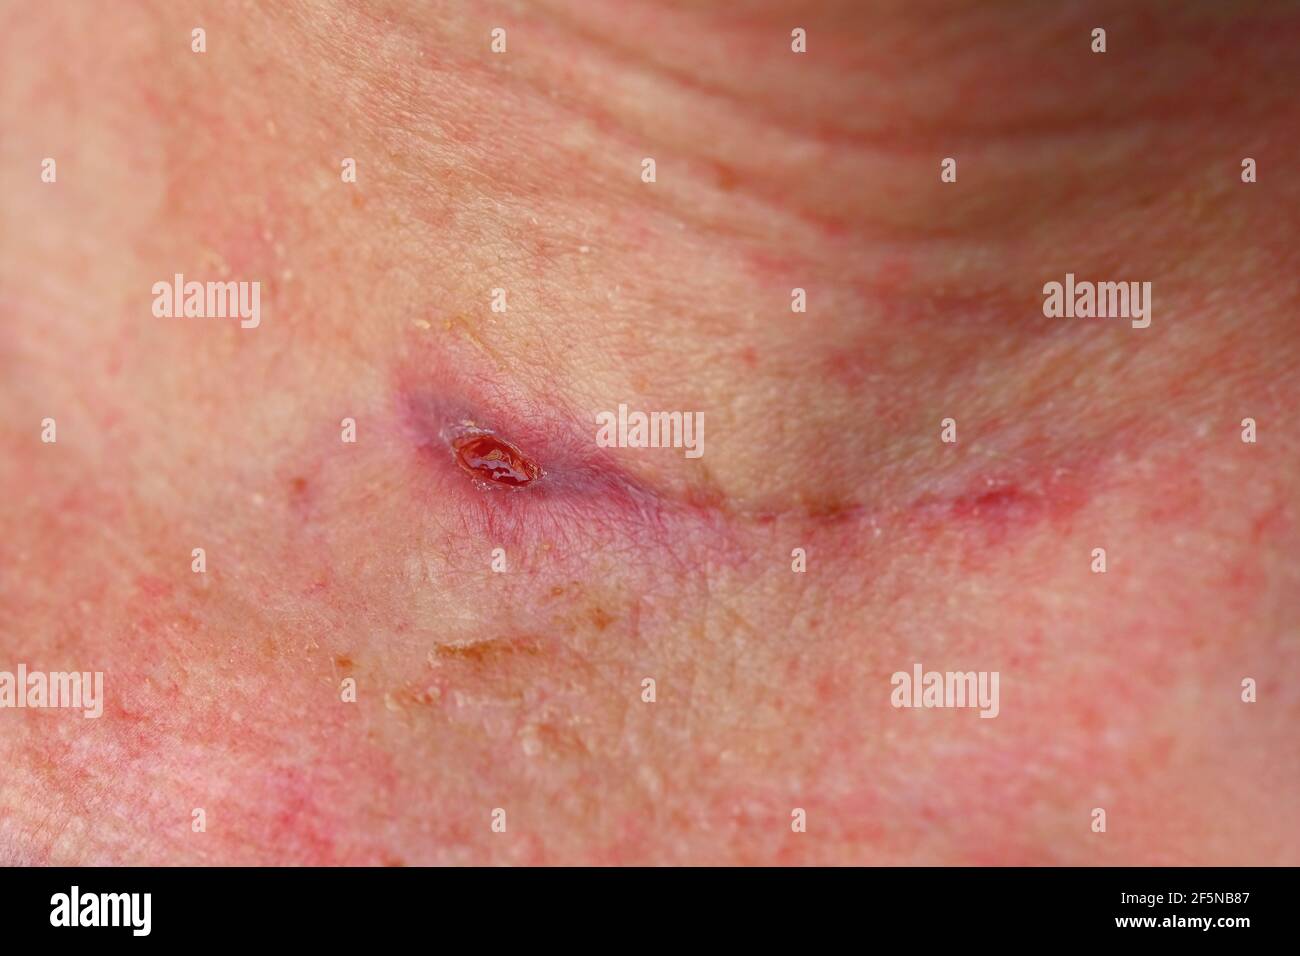 Freshly healed scar on the neck after thyroid surgery. Stock Photo